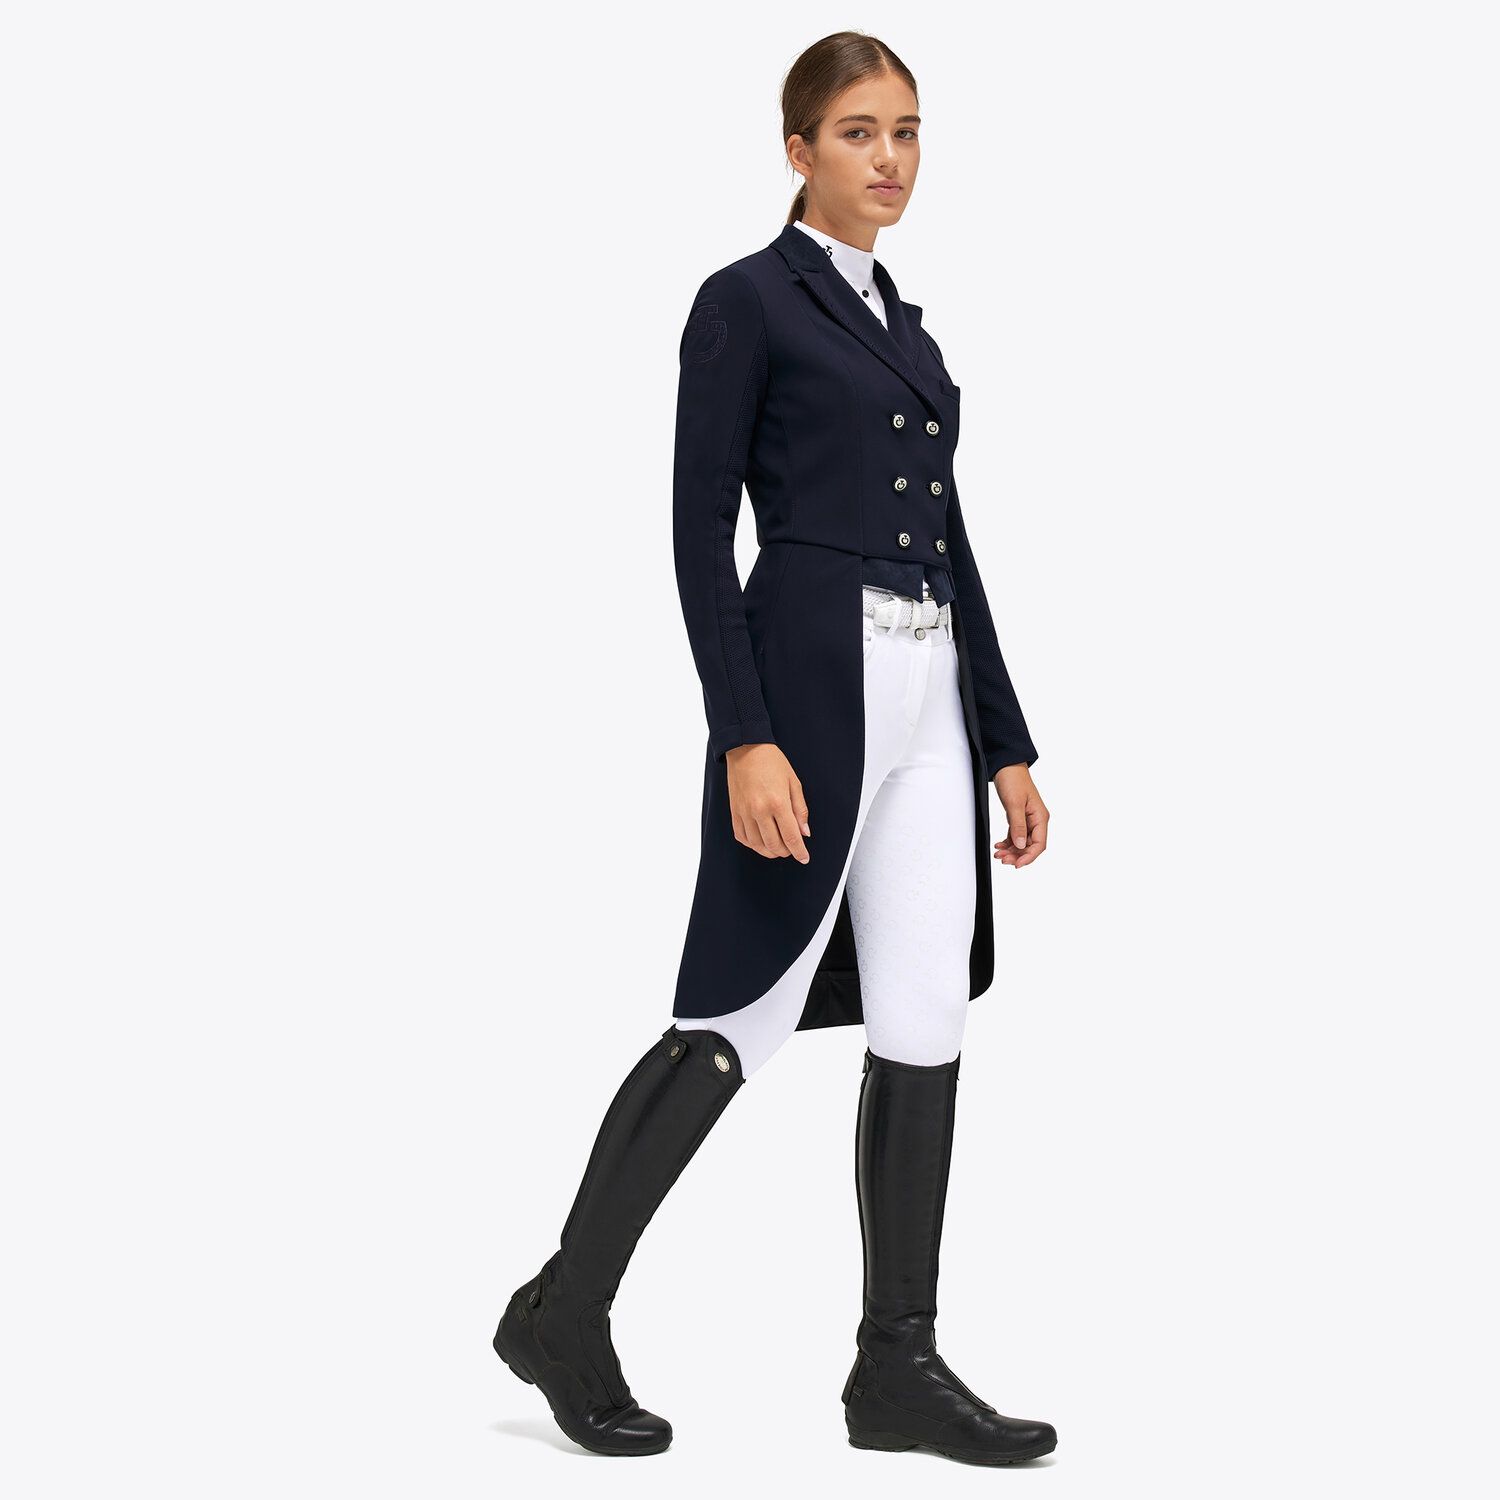 Cavalleria Toscana Women's tailcoat with covered b NAVY-4